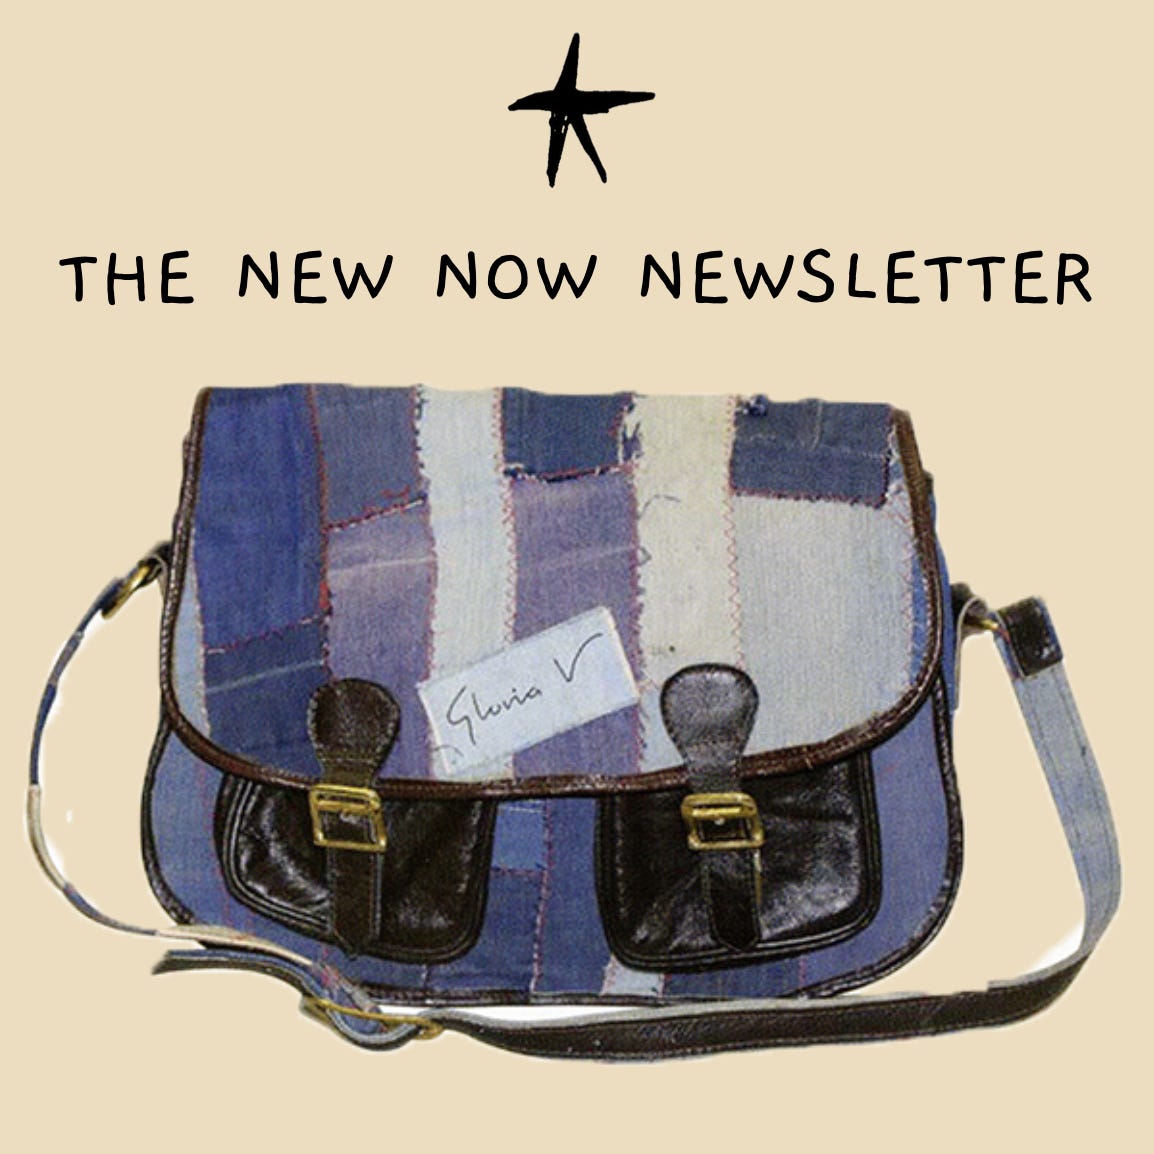 THE NEW NOW NEWSLETTER